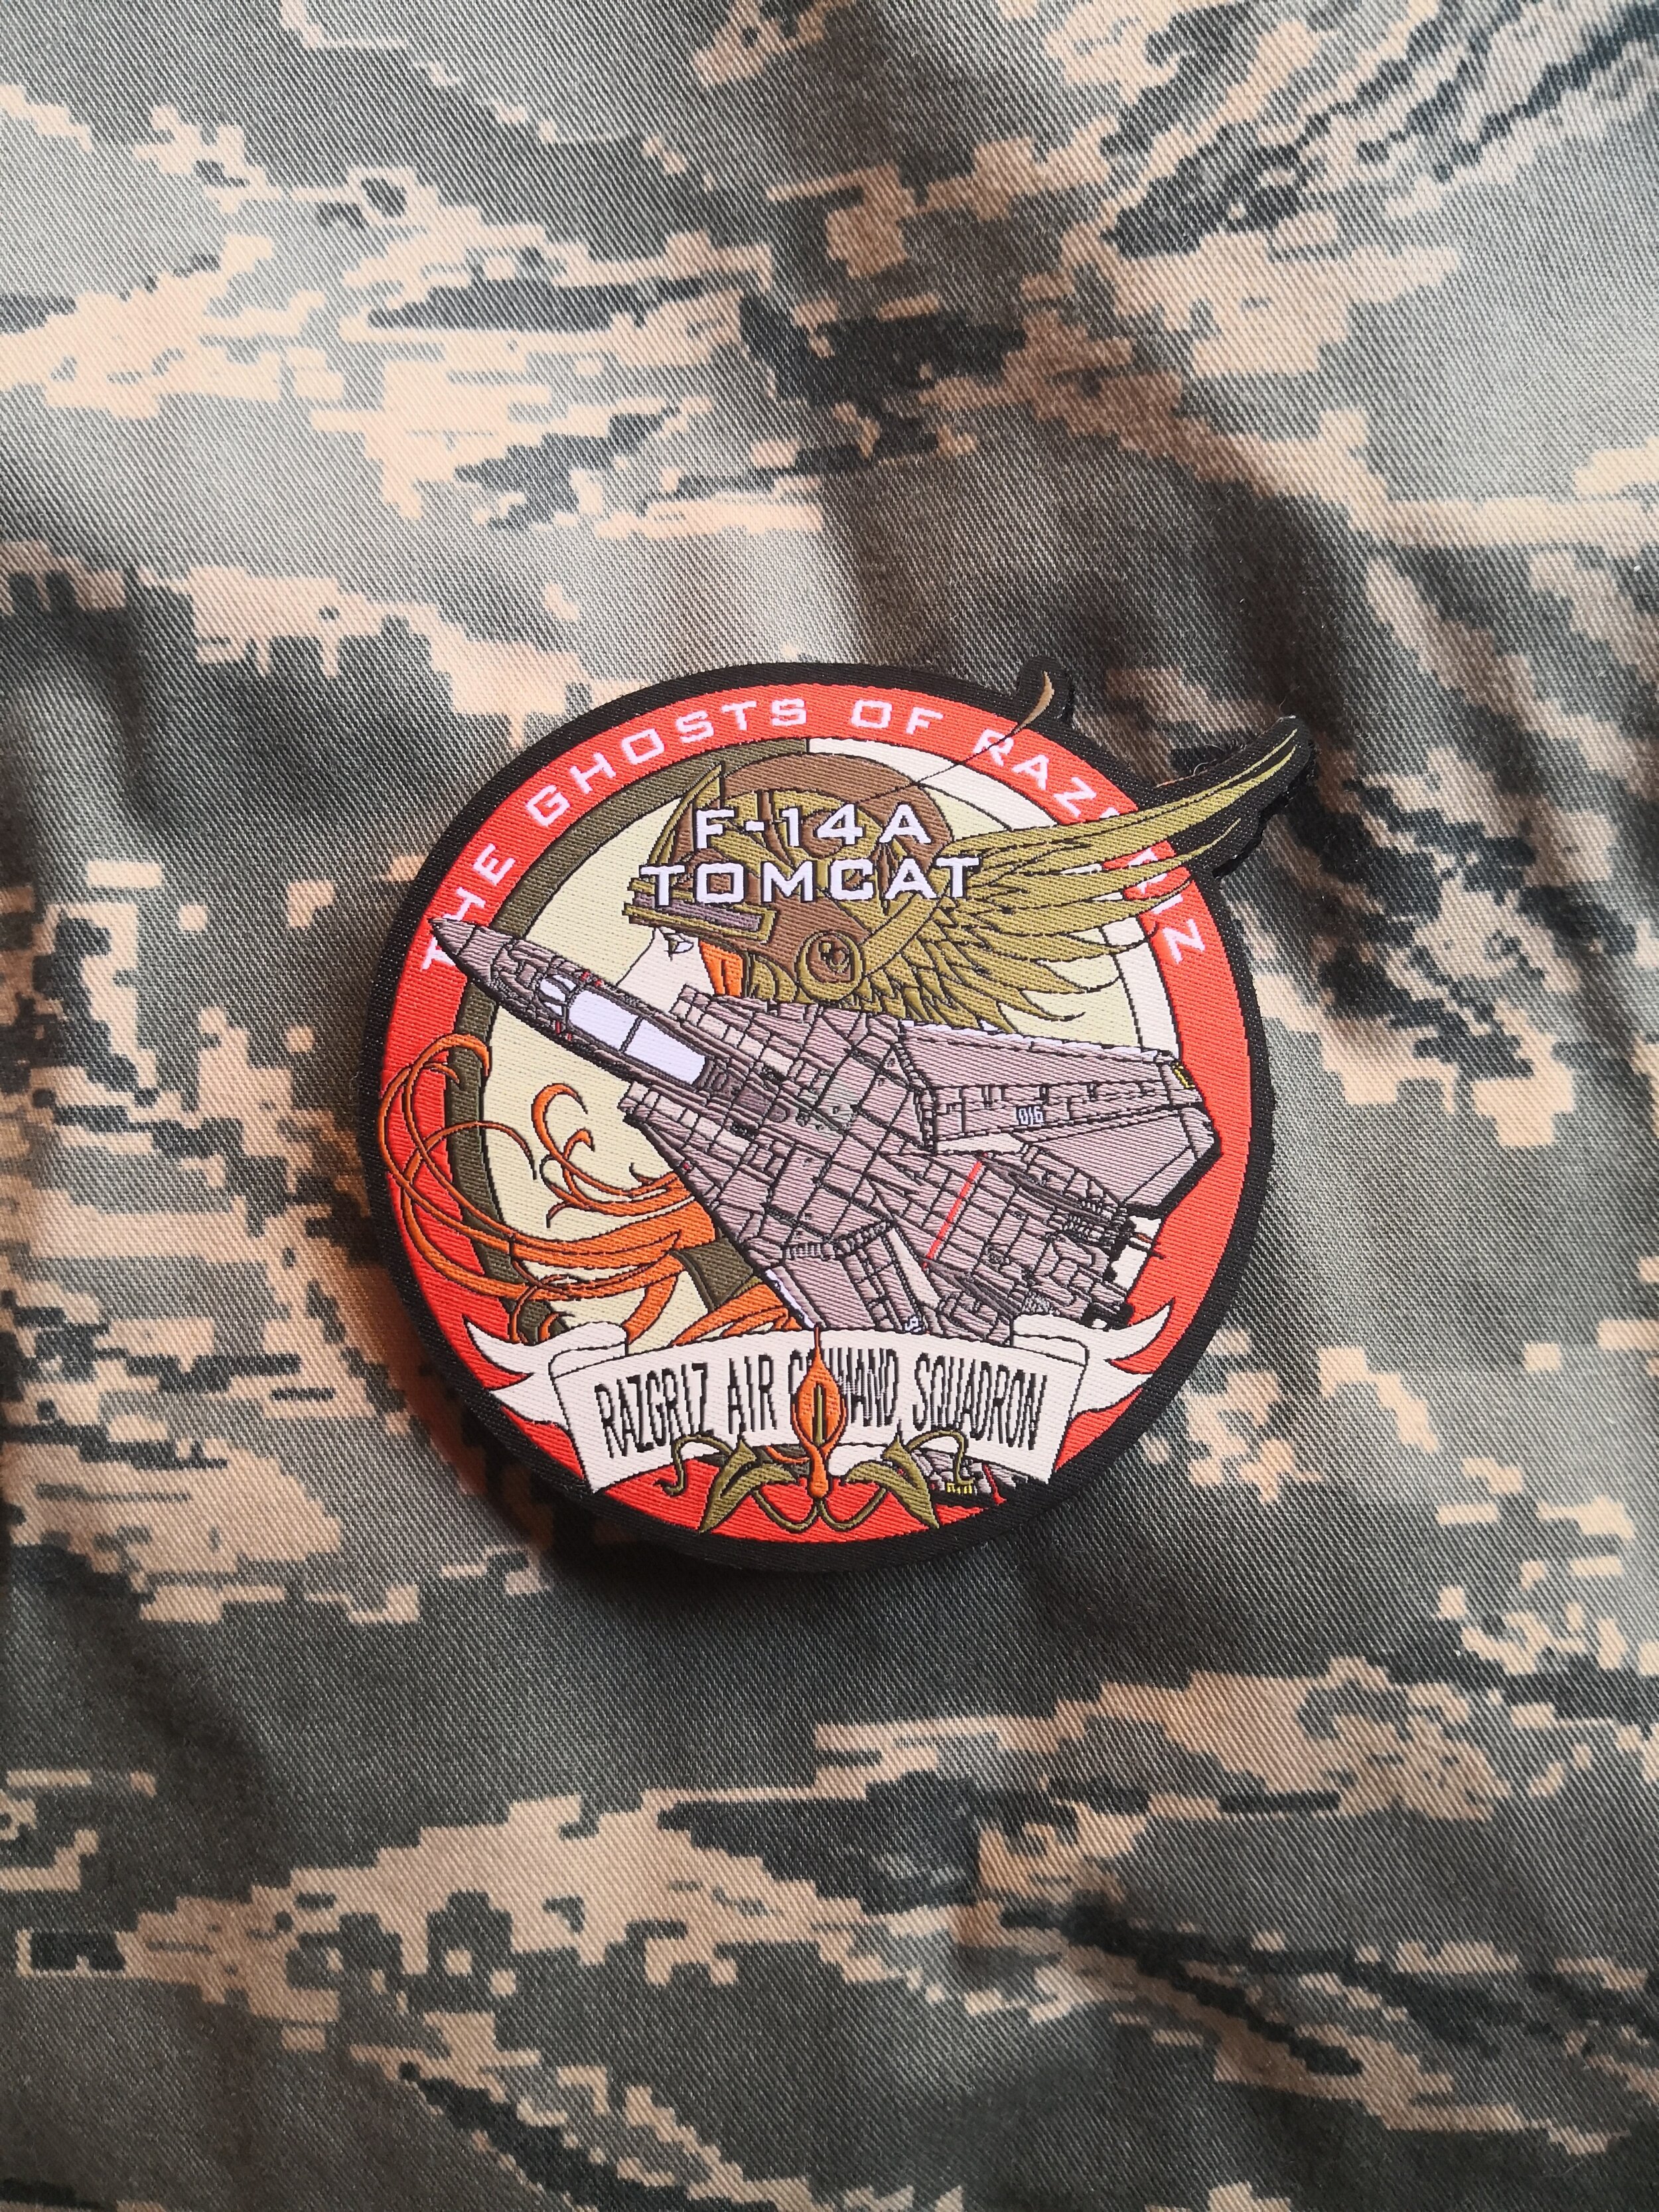 My new morale patches have finally arrived! : r/acecombat